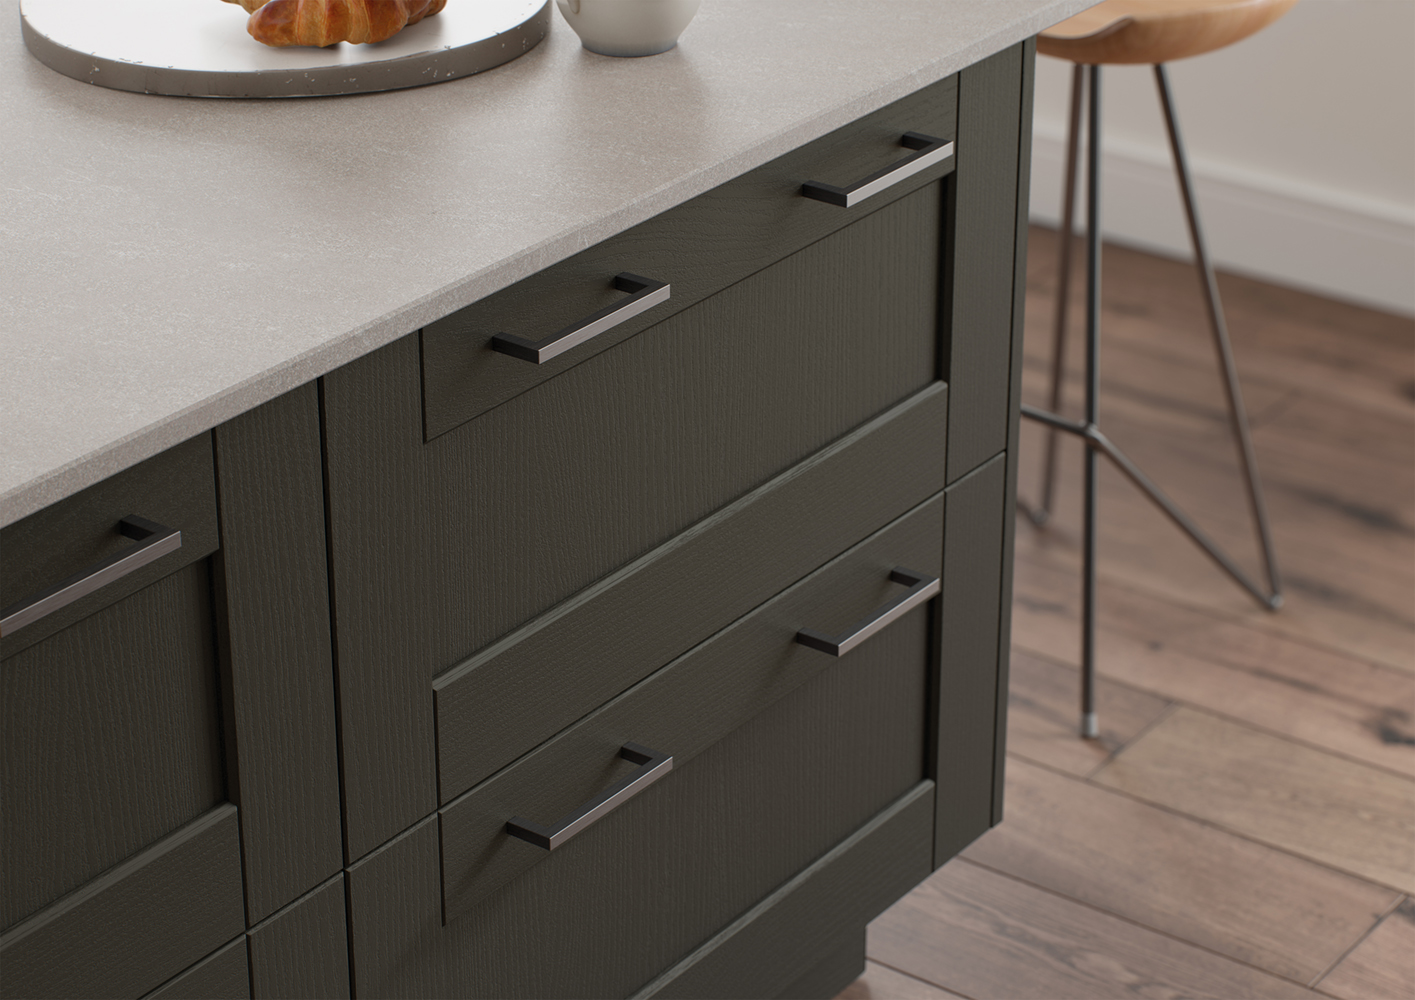 Cameo image of Kendal shaker drawers on kitchen island, made by The Kitchen Depot